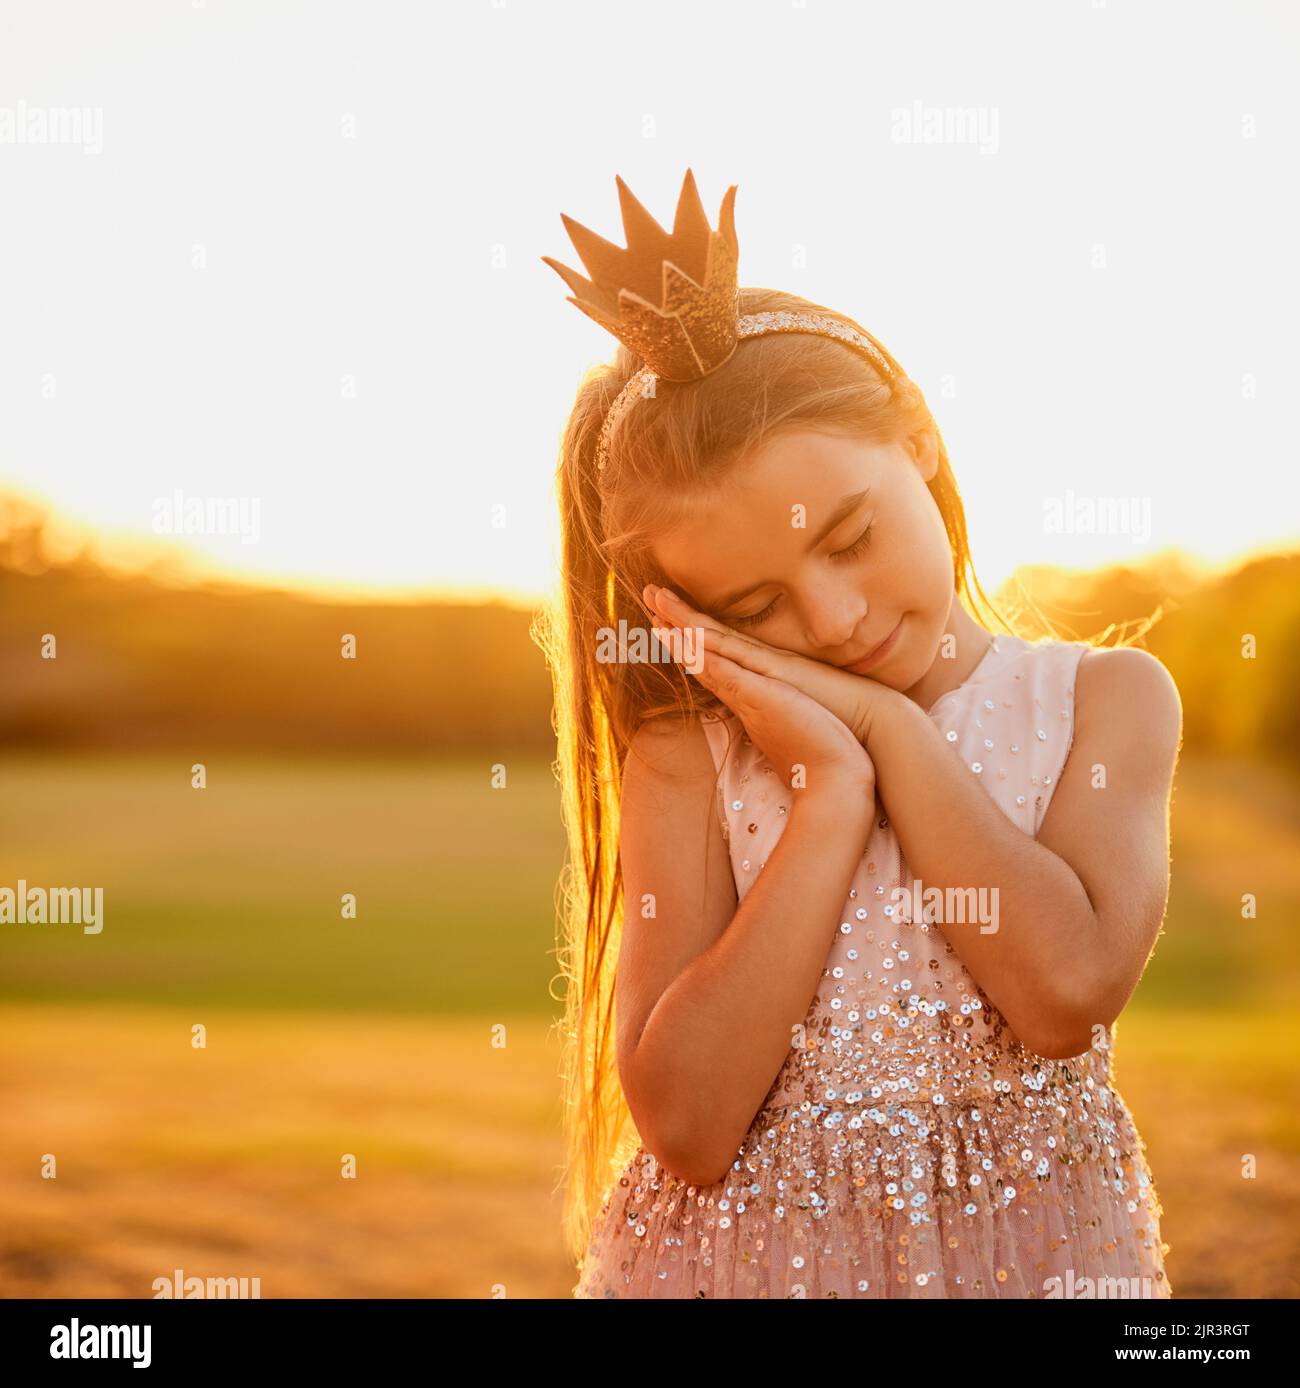 She likes to pretend to sleep while standing. an adorable little girl playing outdoors. Stock Photo